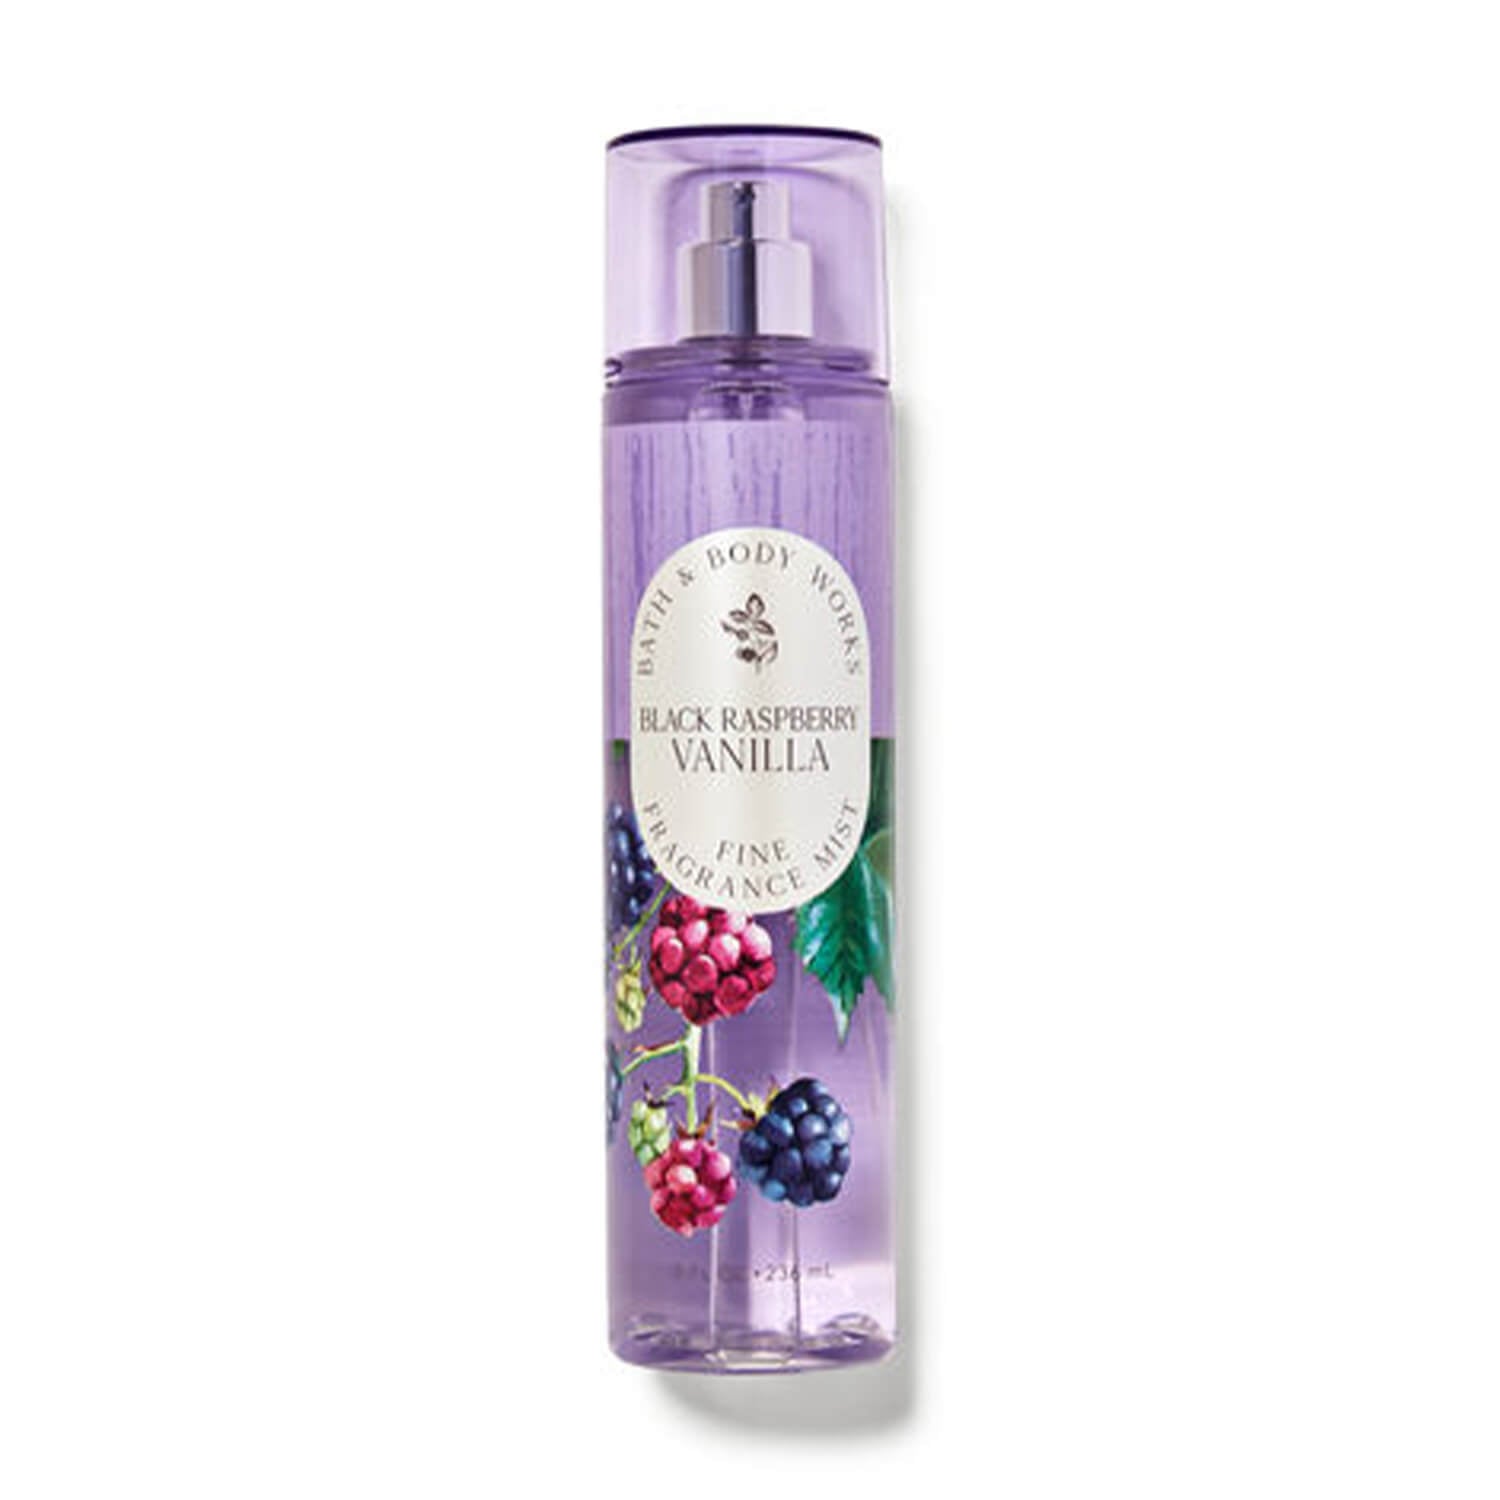 shop bath and body works mist black raspberry available at heygirl.pk for delivery in Pakistan